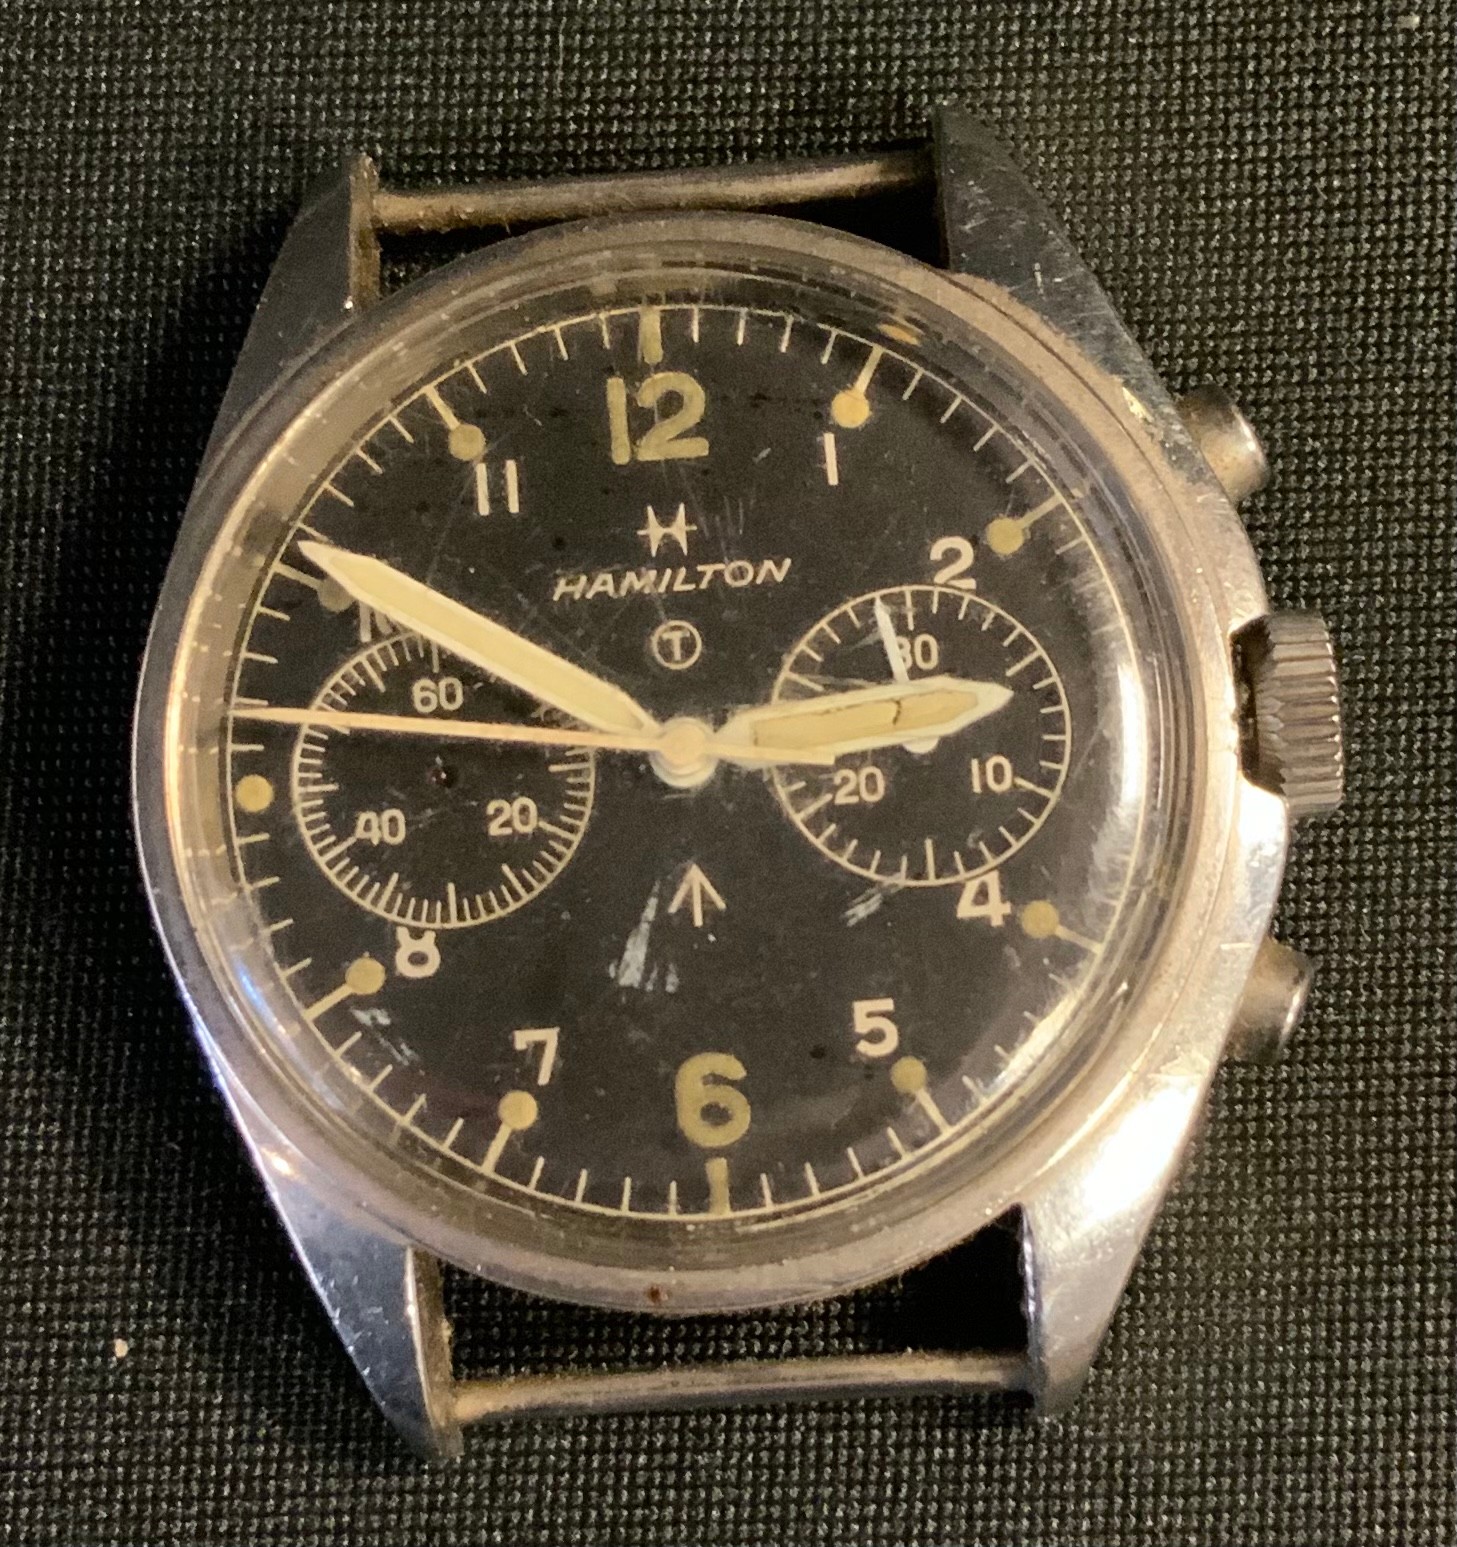 Post War British Military issue 1970s Hamilton Chronometer watch head, black dial, twin subsidiary - Image 2 of 3